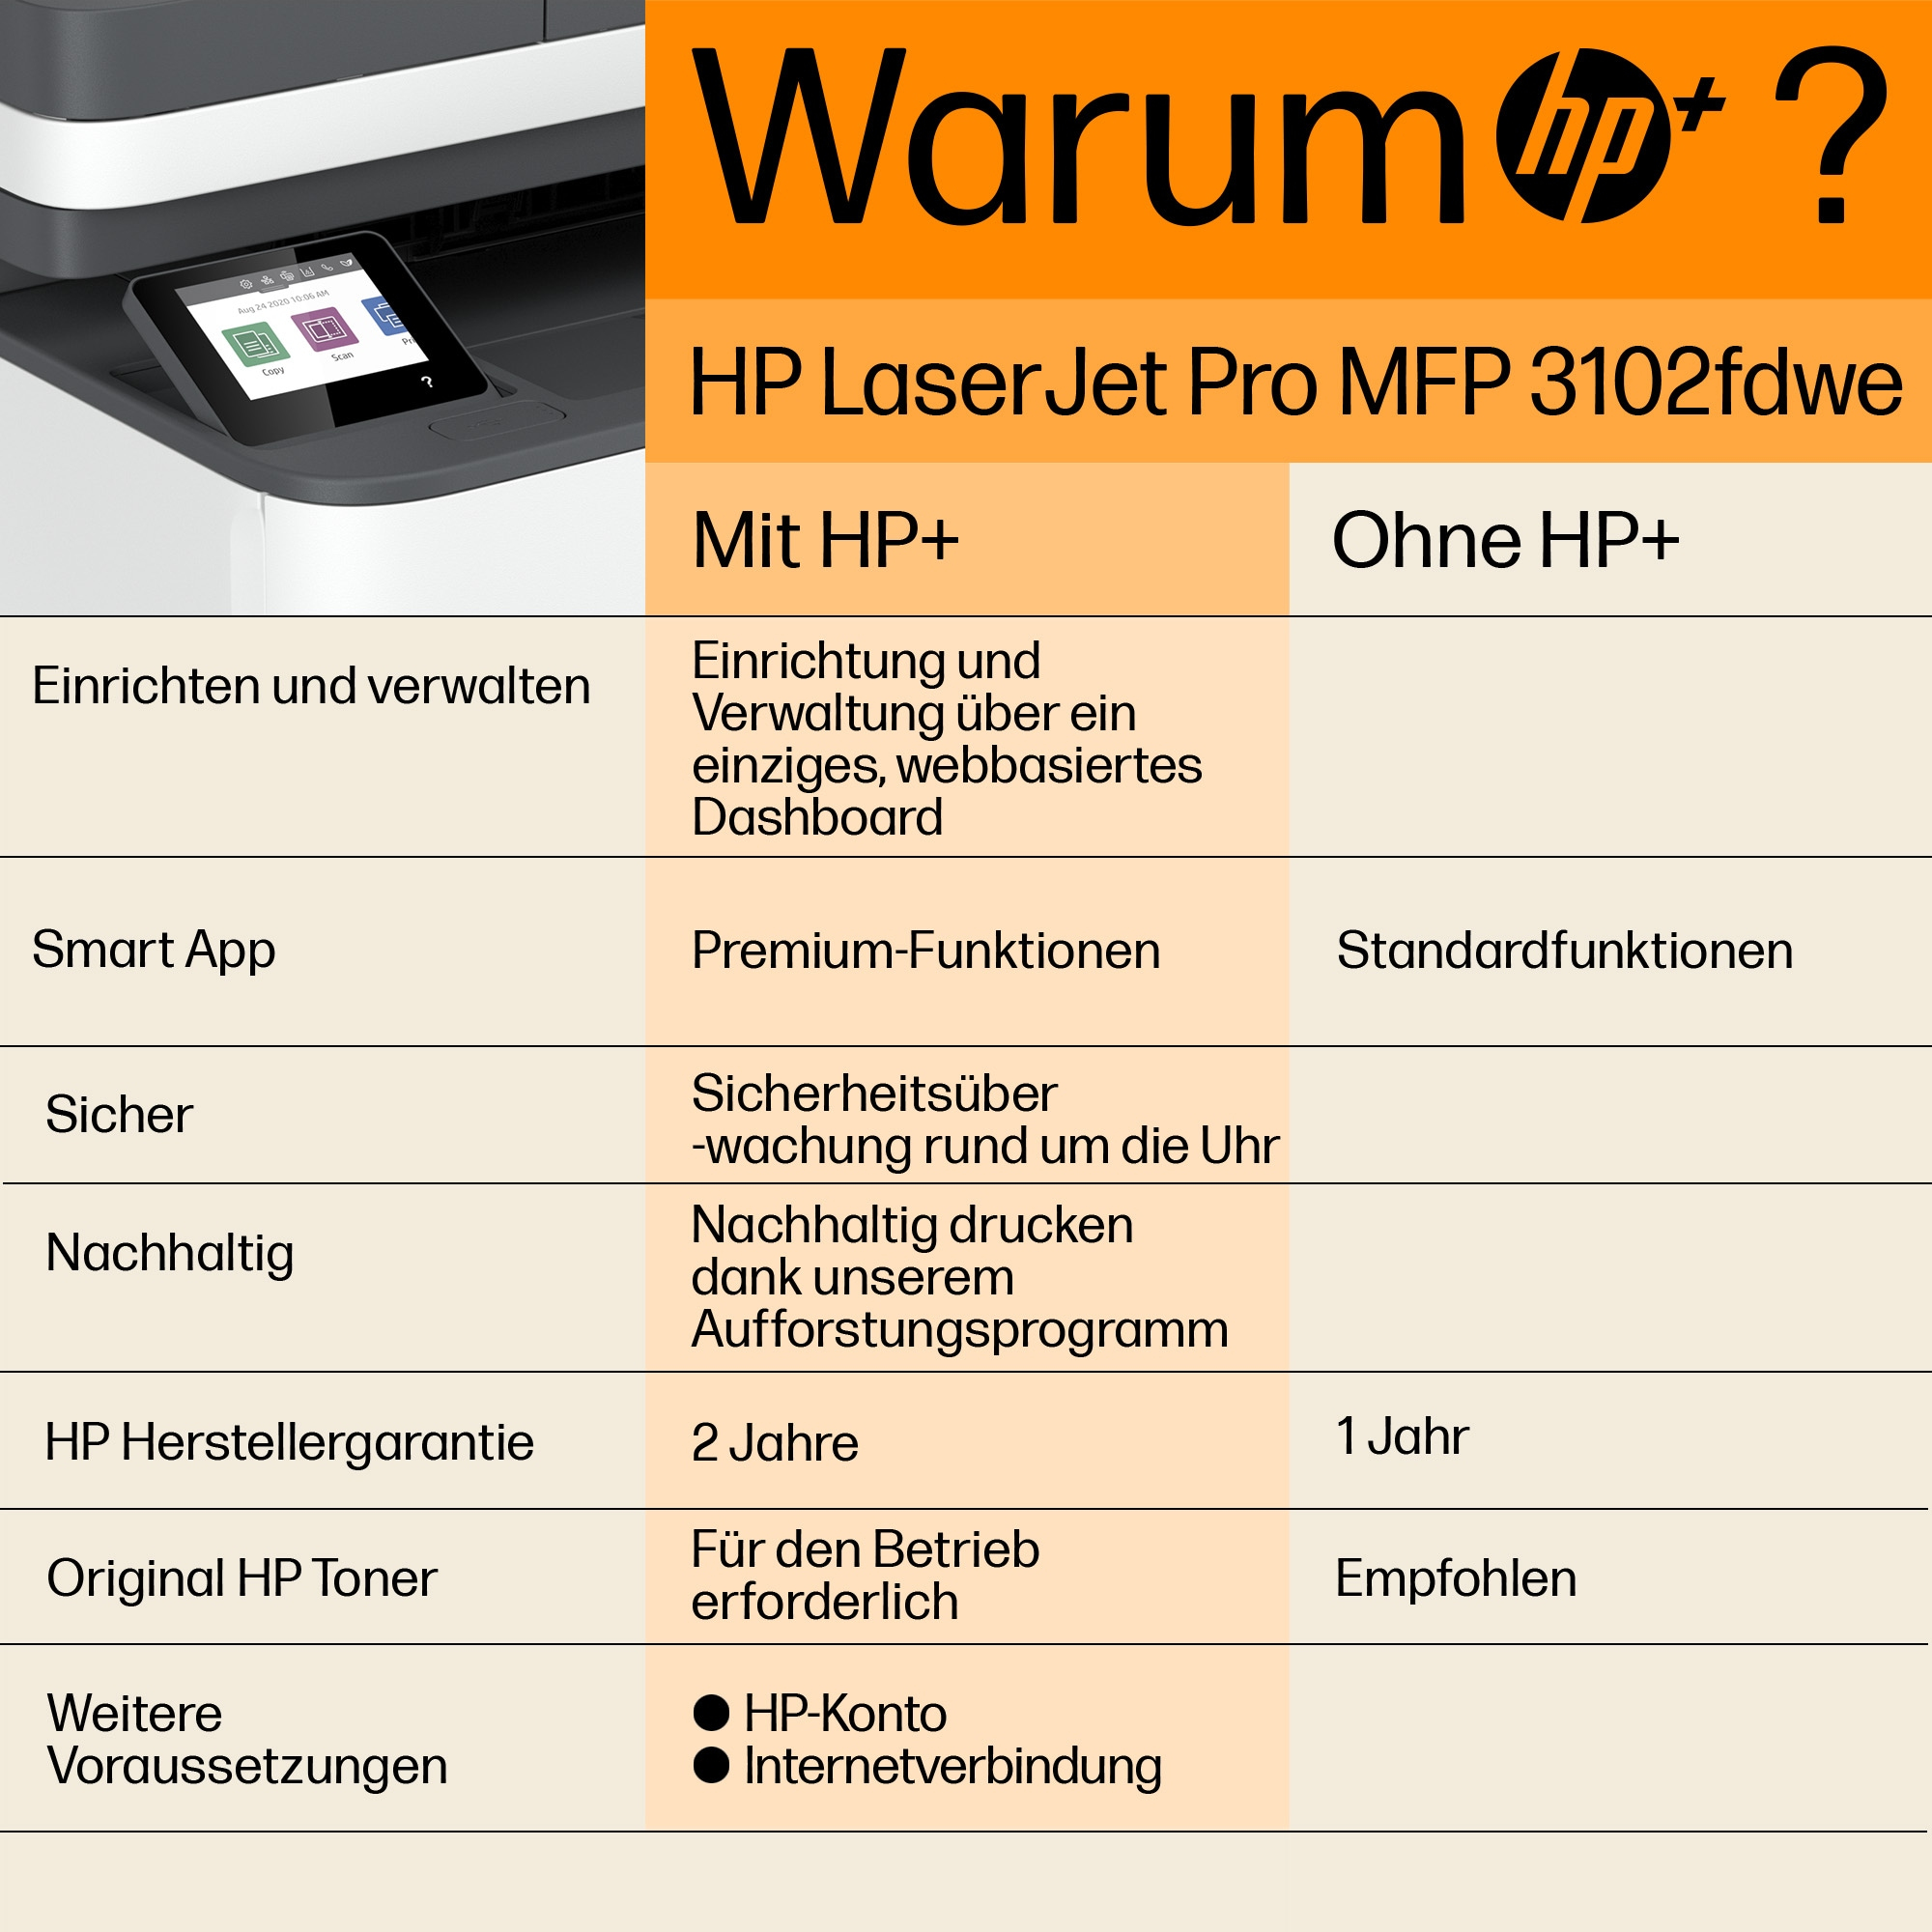 HP 3G630E  HP LaserJet Pro MFP3102fdwe Printer, Black and white, Printer  for Small medium business, Print, copy, scan, fax, Automatic document  feeder; Two-sided printing; Front USB flash drive port; Touchscreen